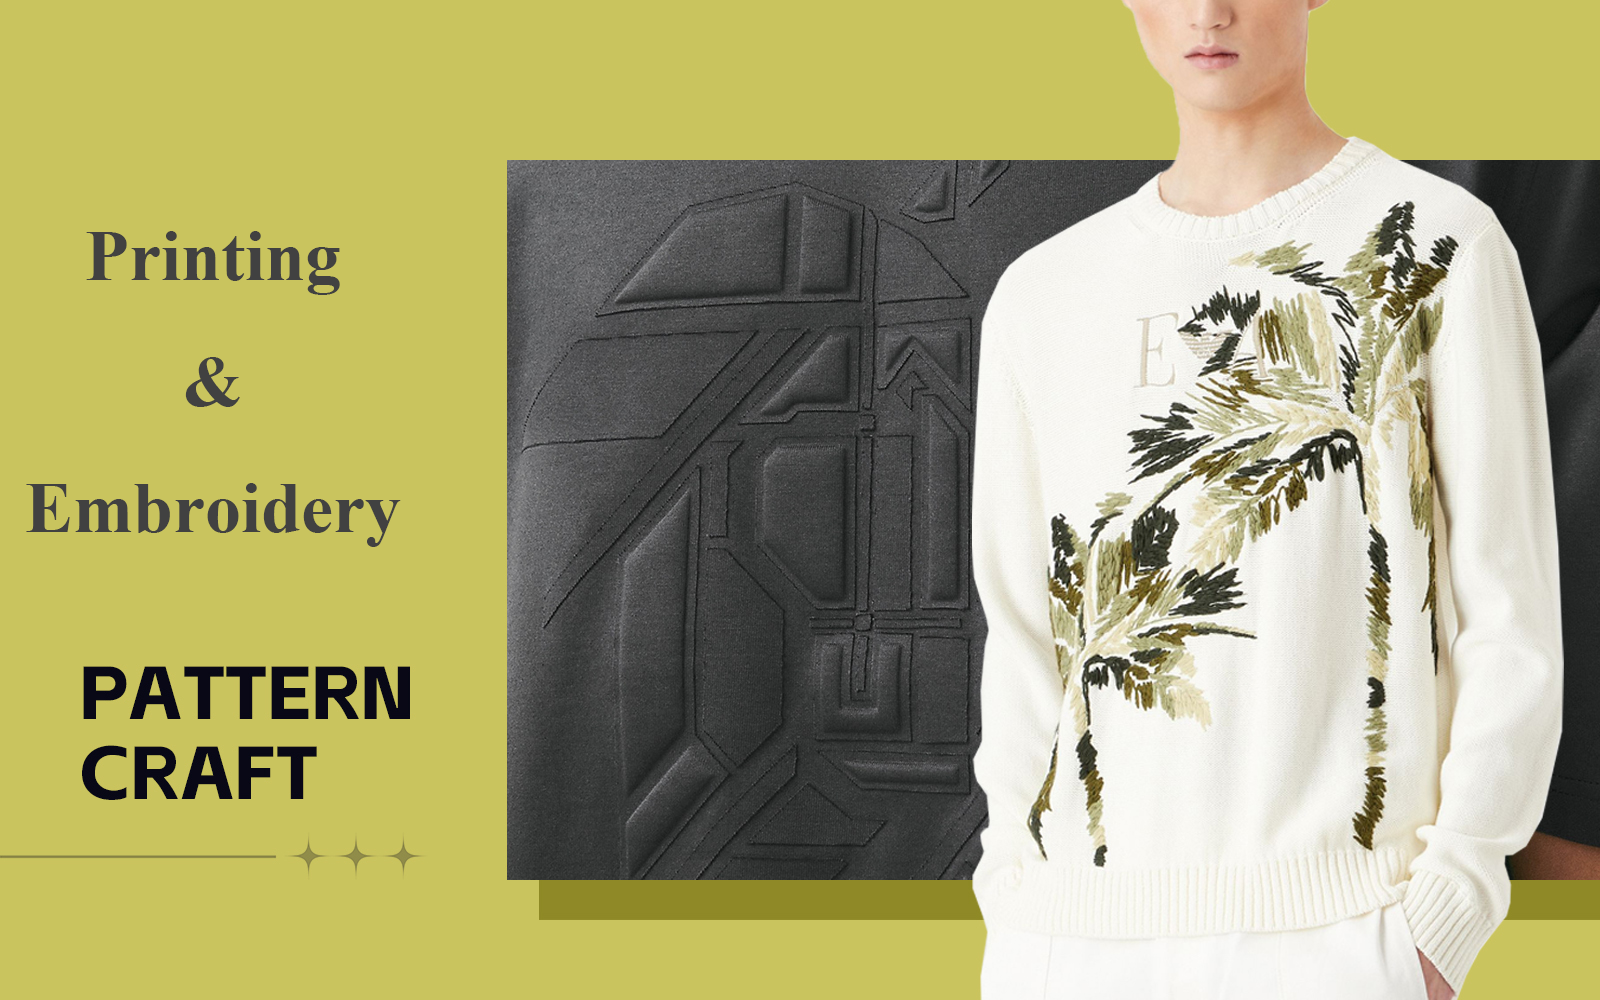 Printing & Embroidery -- A/W 24/25 Pattern Craft Trend for Men's Knitwear